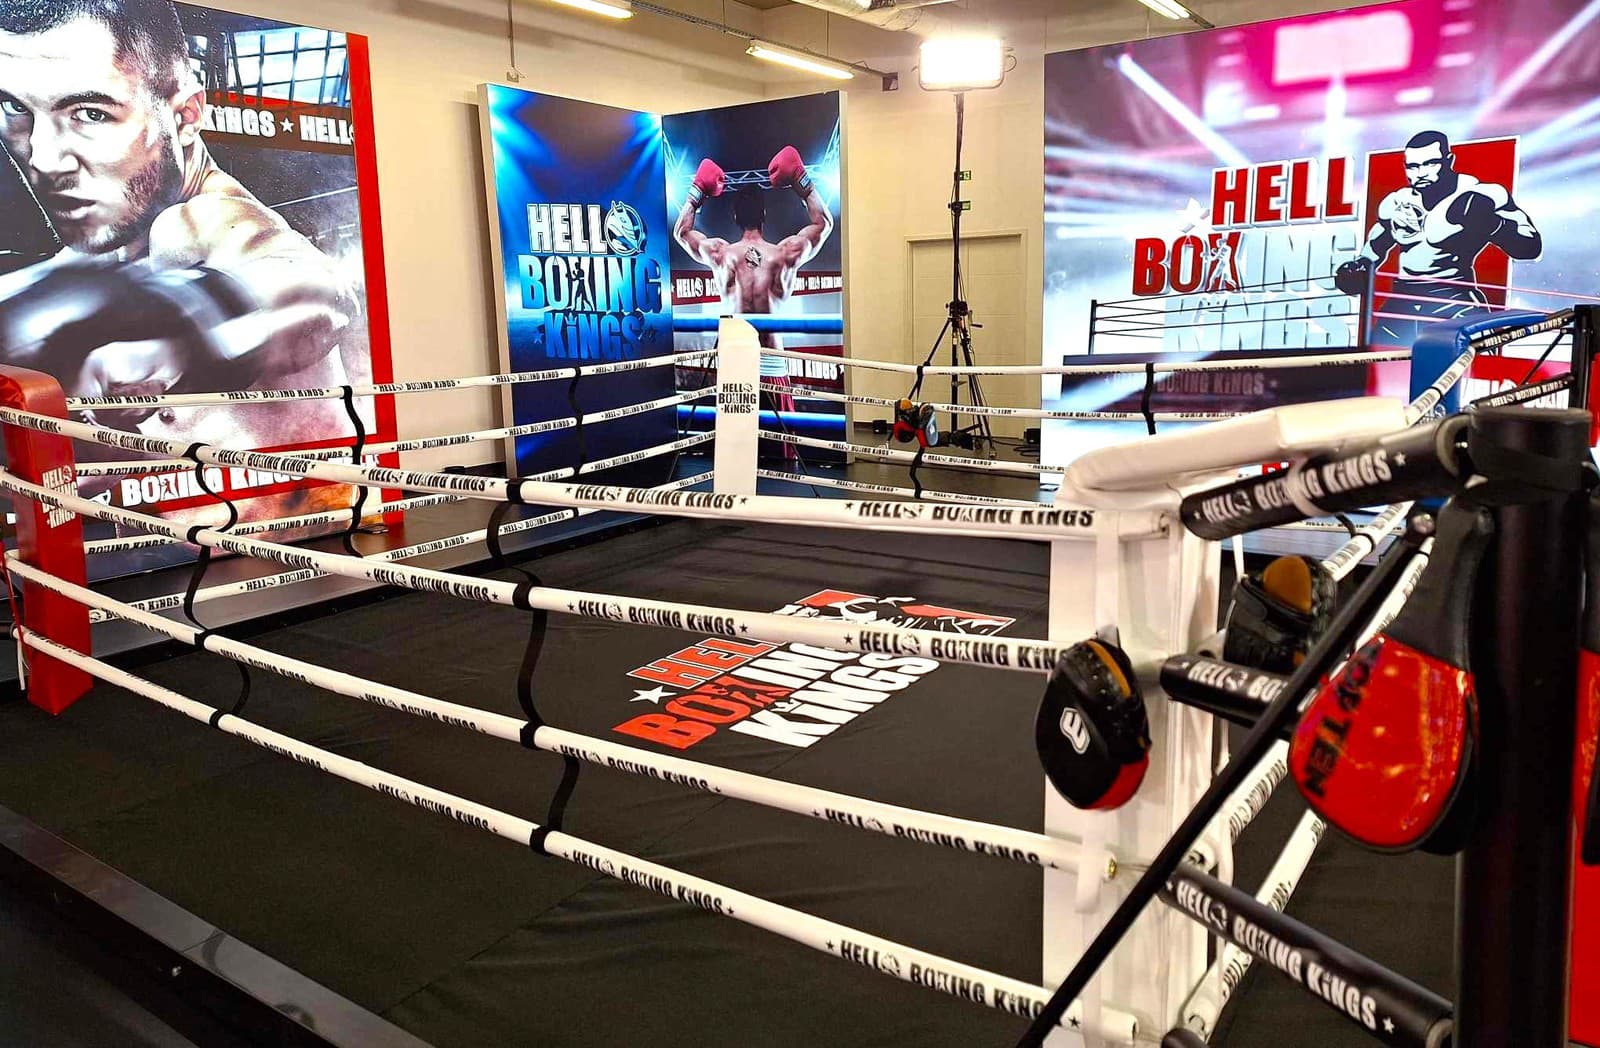 HELL Boxing Kings je